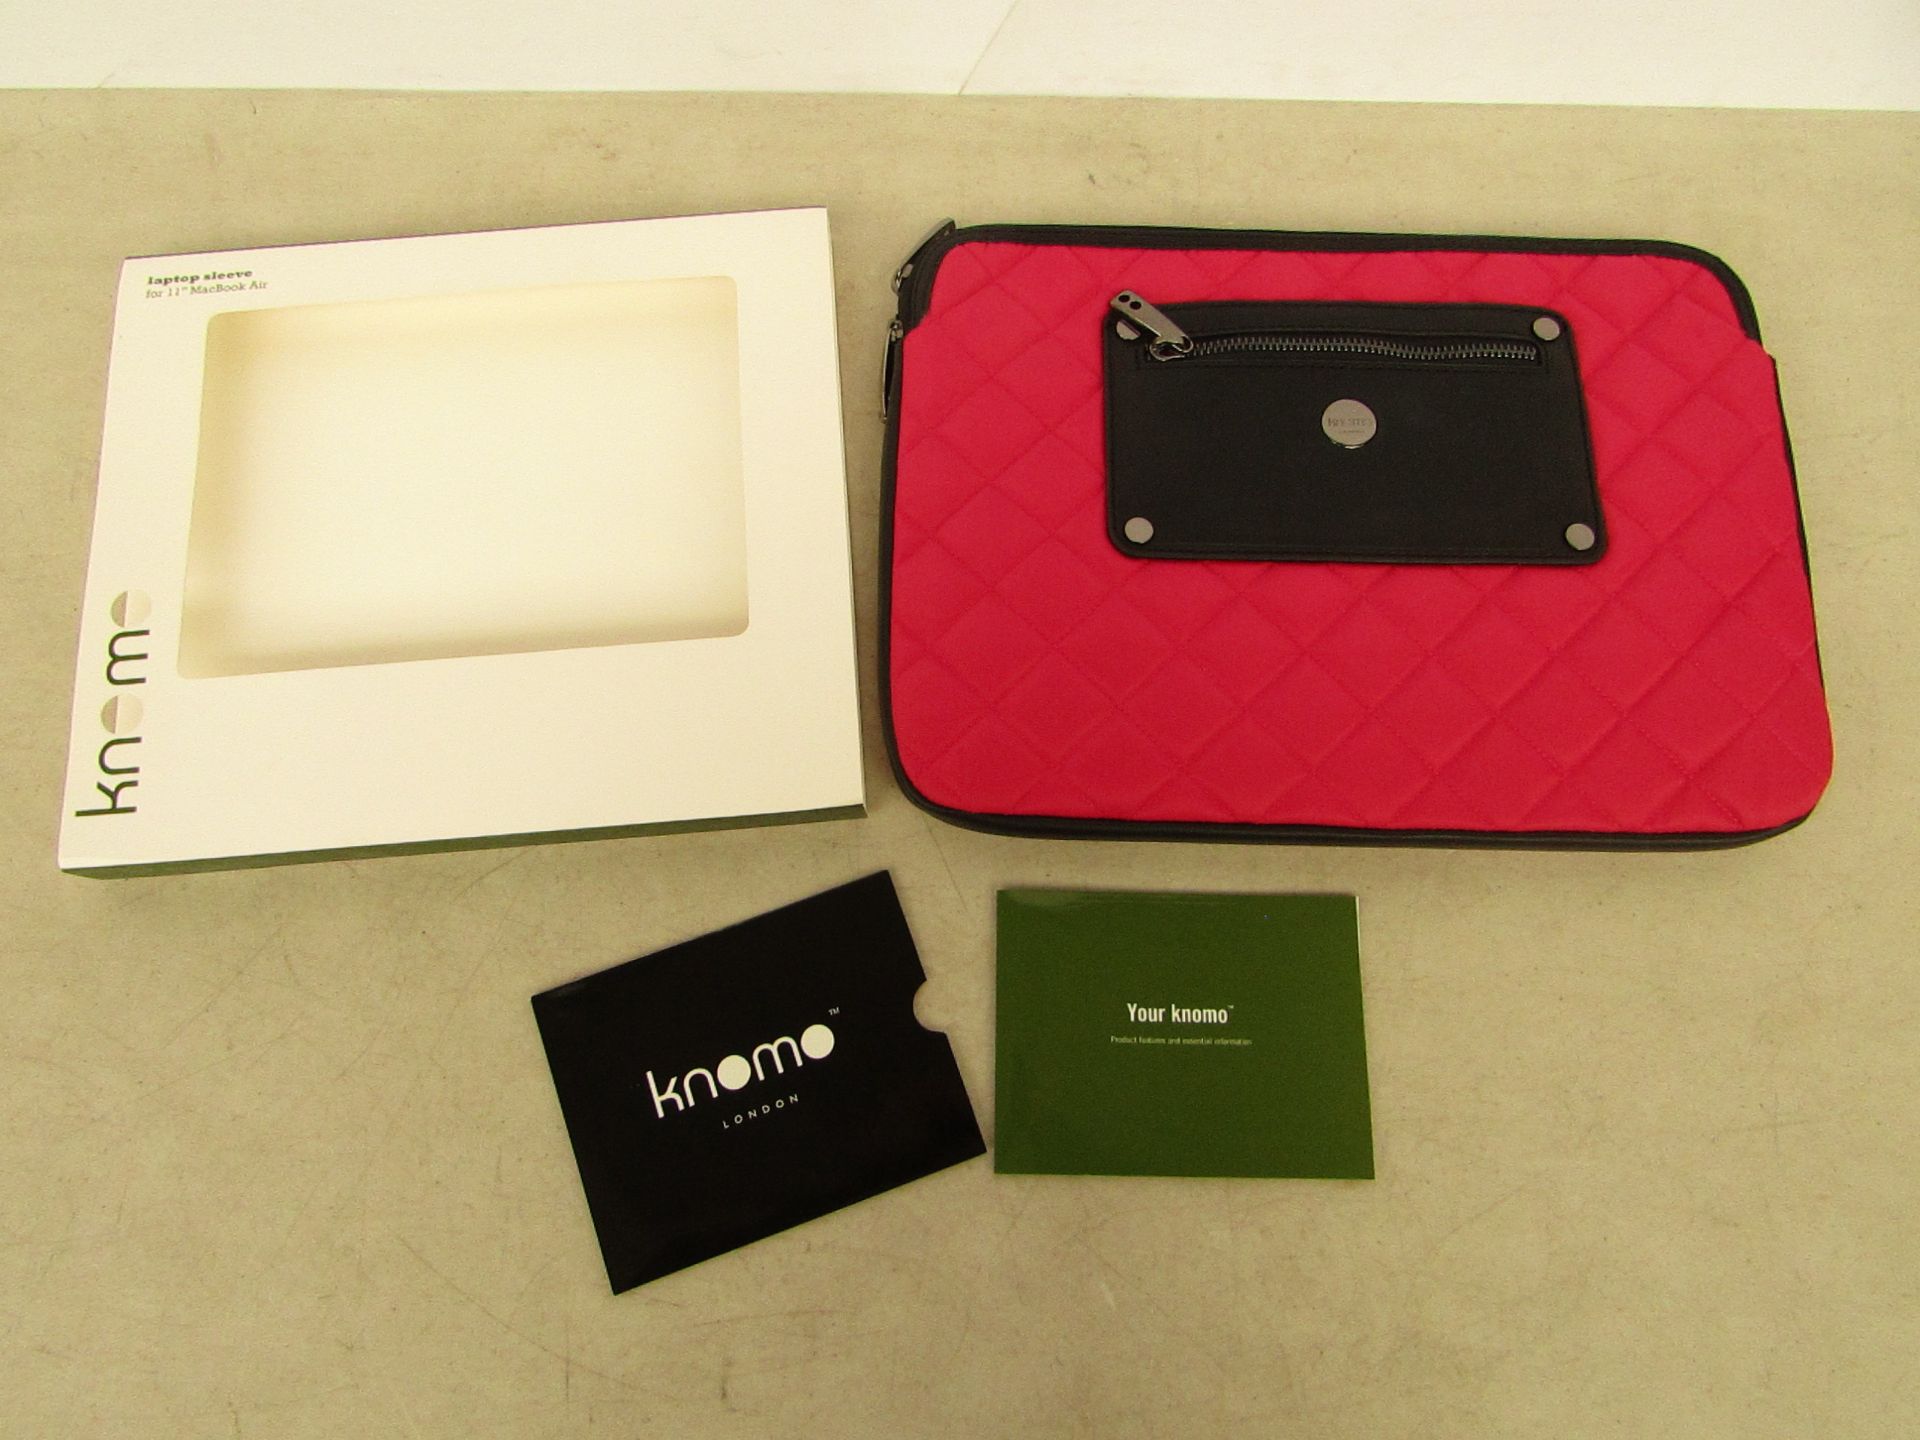 10x Knomo pink laptop sleeve for 11" MacBook Air , brand new and boxed/packaged. Each RRP £49.00